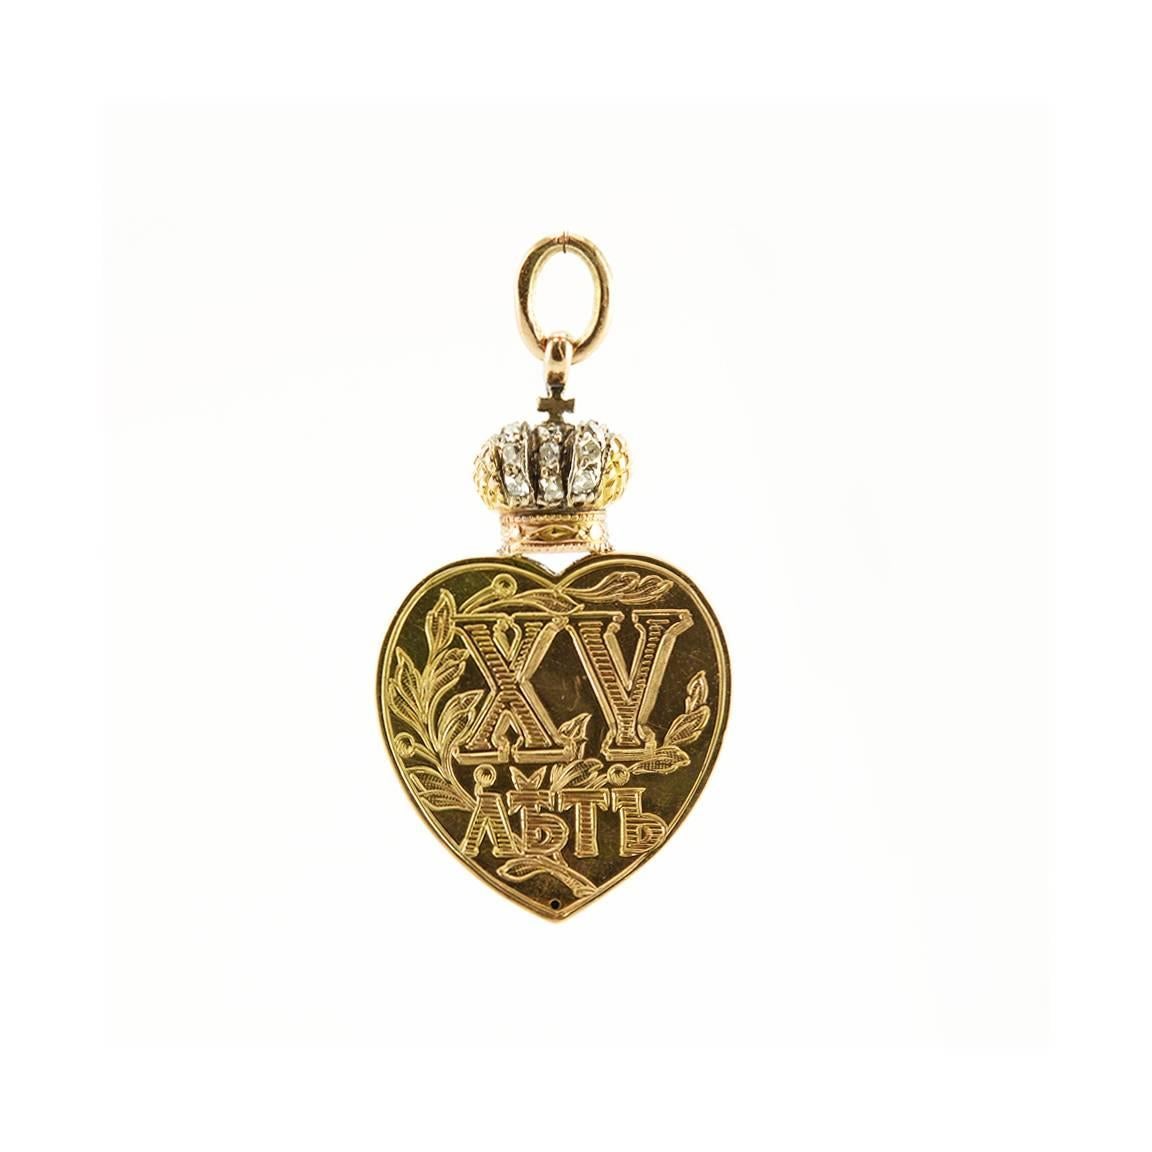 A rare antique Fabergé Imperial presentation diamond-set varicolor gold 15th anniversary pendant locket for photographs, workmaster Michael Perchin, St. Petersburg, circa 1899. The heart-shaped pendant of yellow gold, the front entirely set with